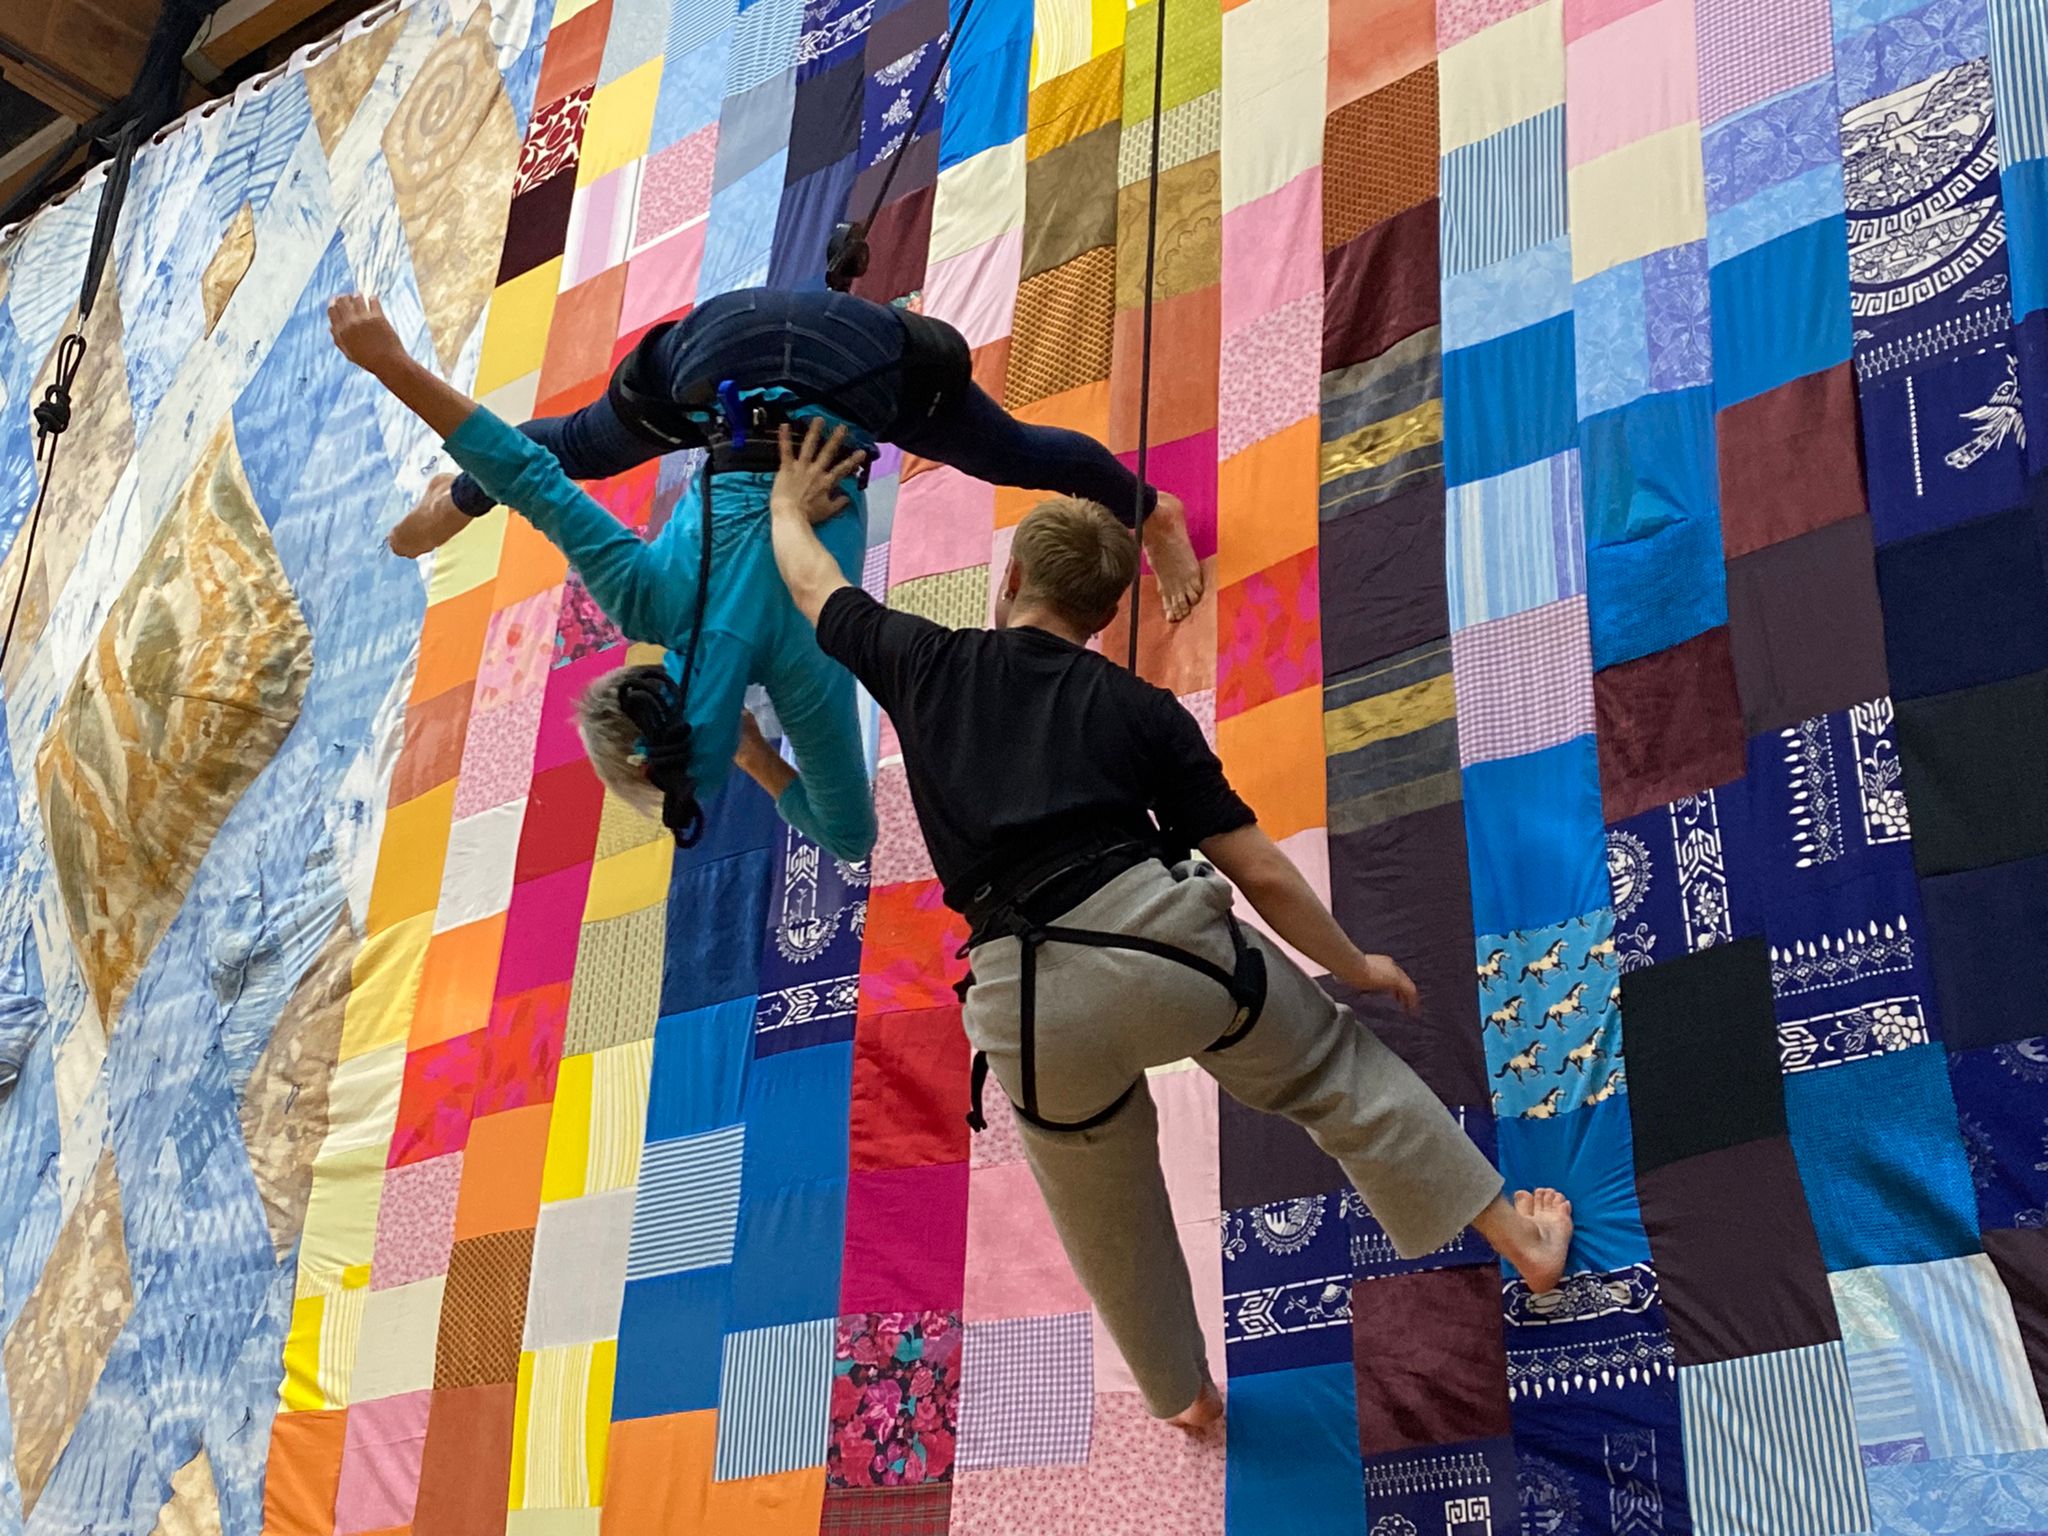 Two aerialists practice movements suspended in the air, on top of a colourful patchwork quilt.